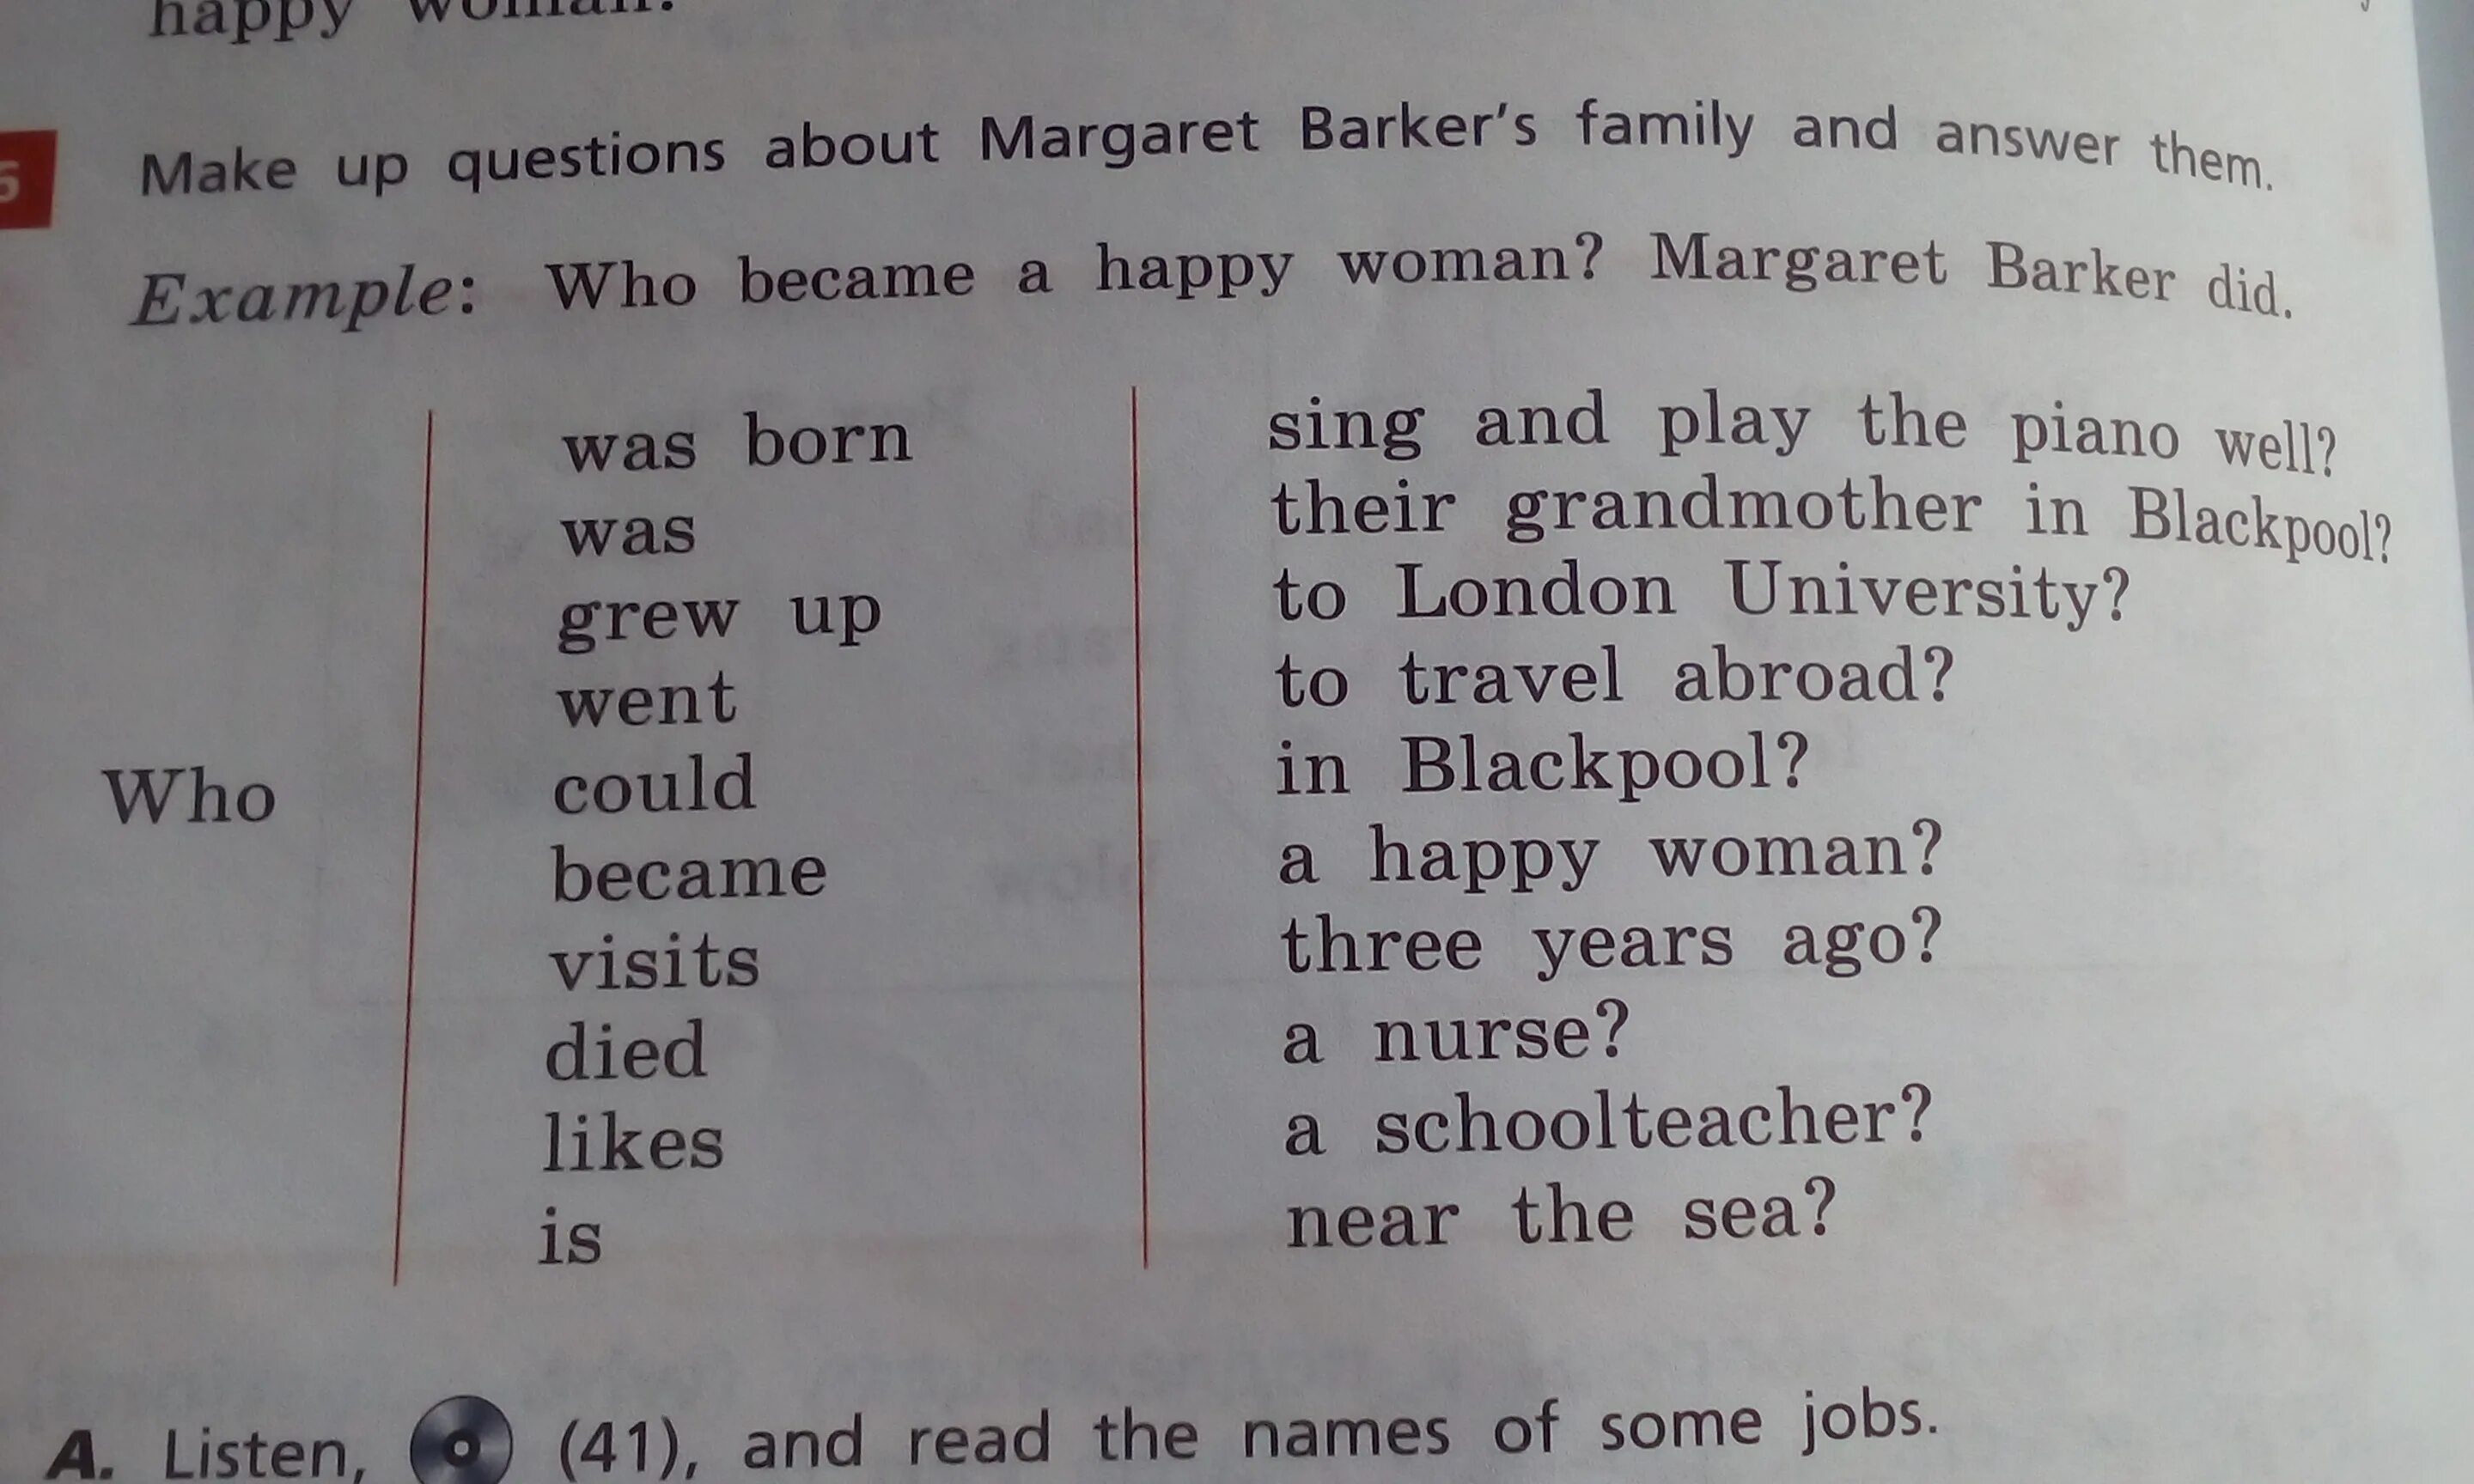 Make up questions to the answers. Make up questions about Margaret Barker's Family and answer them. Make up questions about.